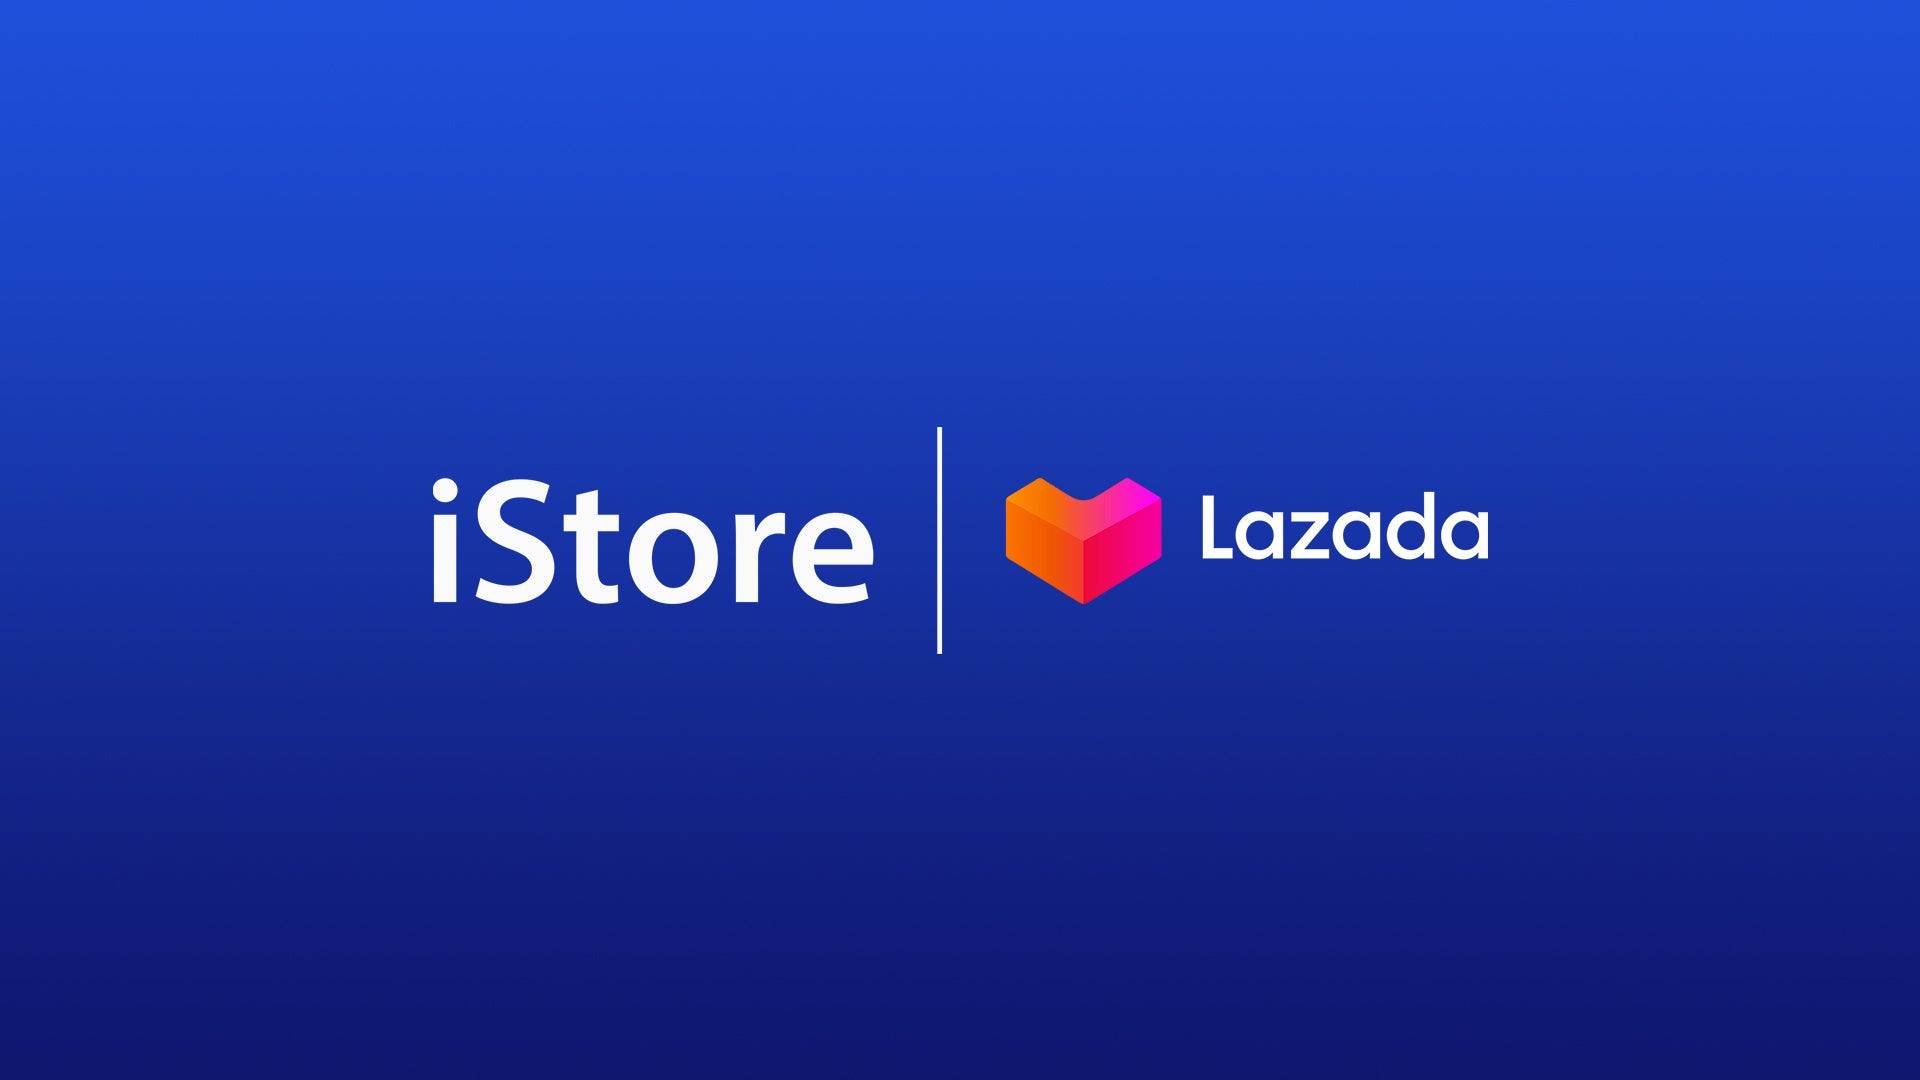 iStore is now on Lazada